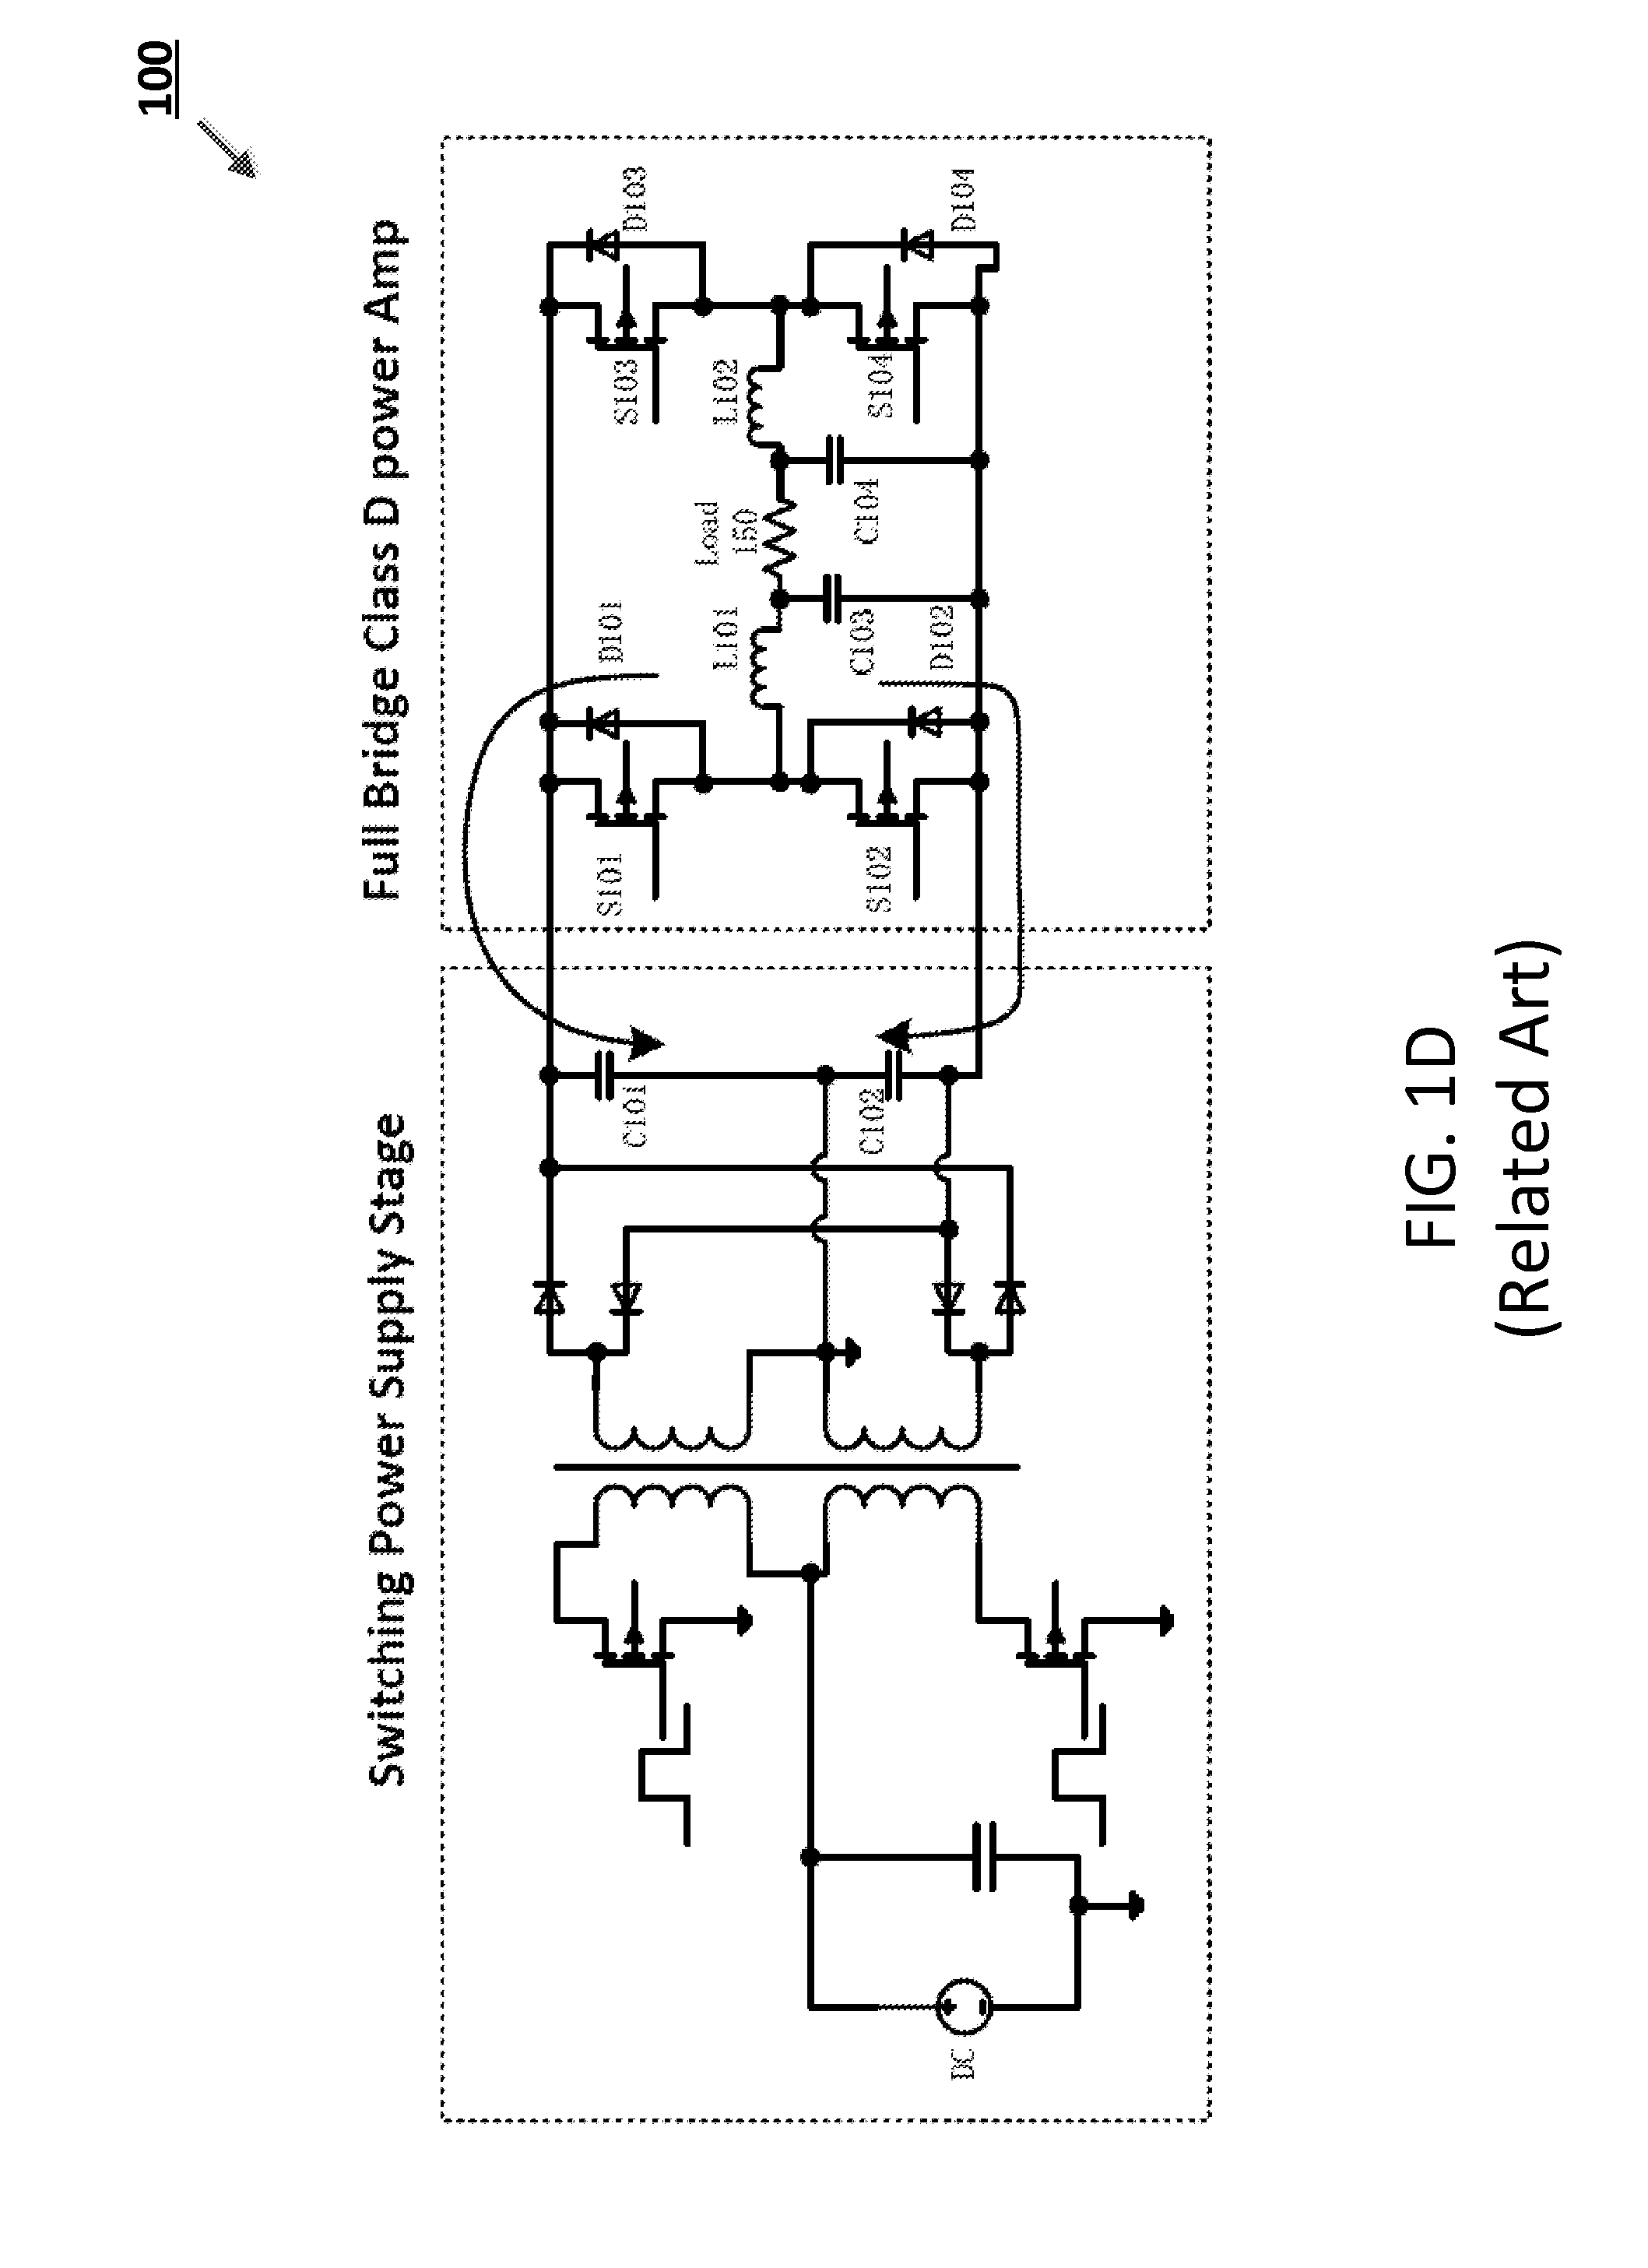 Single stage switching power amplifier with bidirectional energy flow